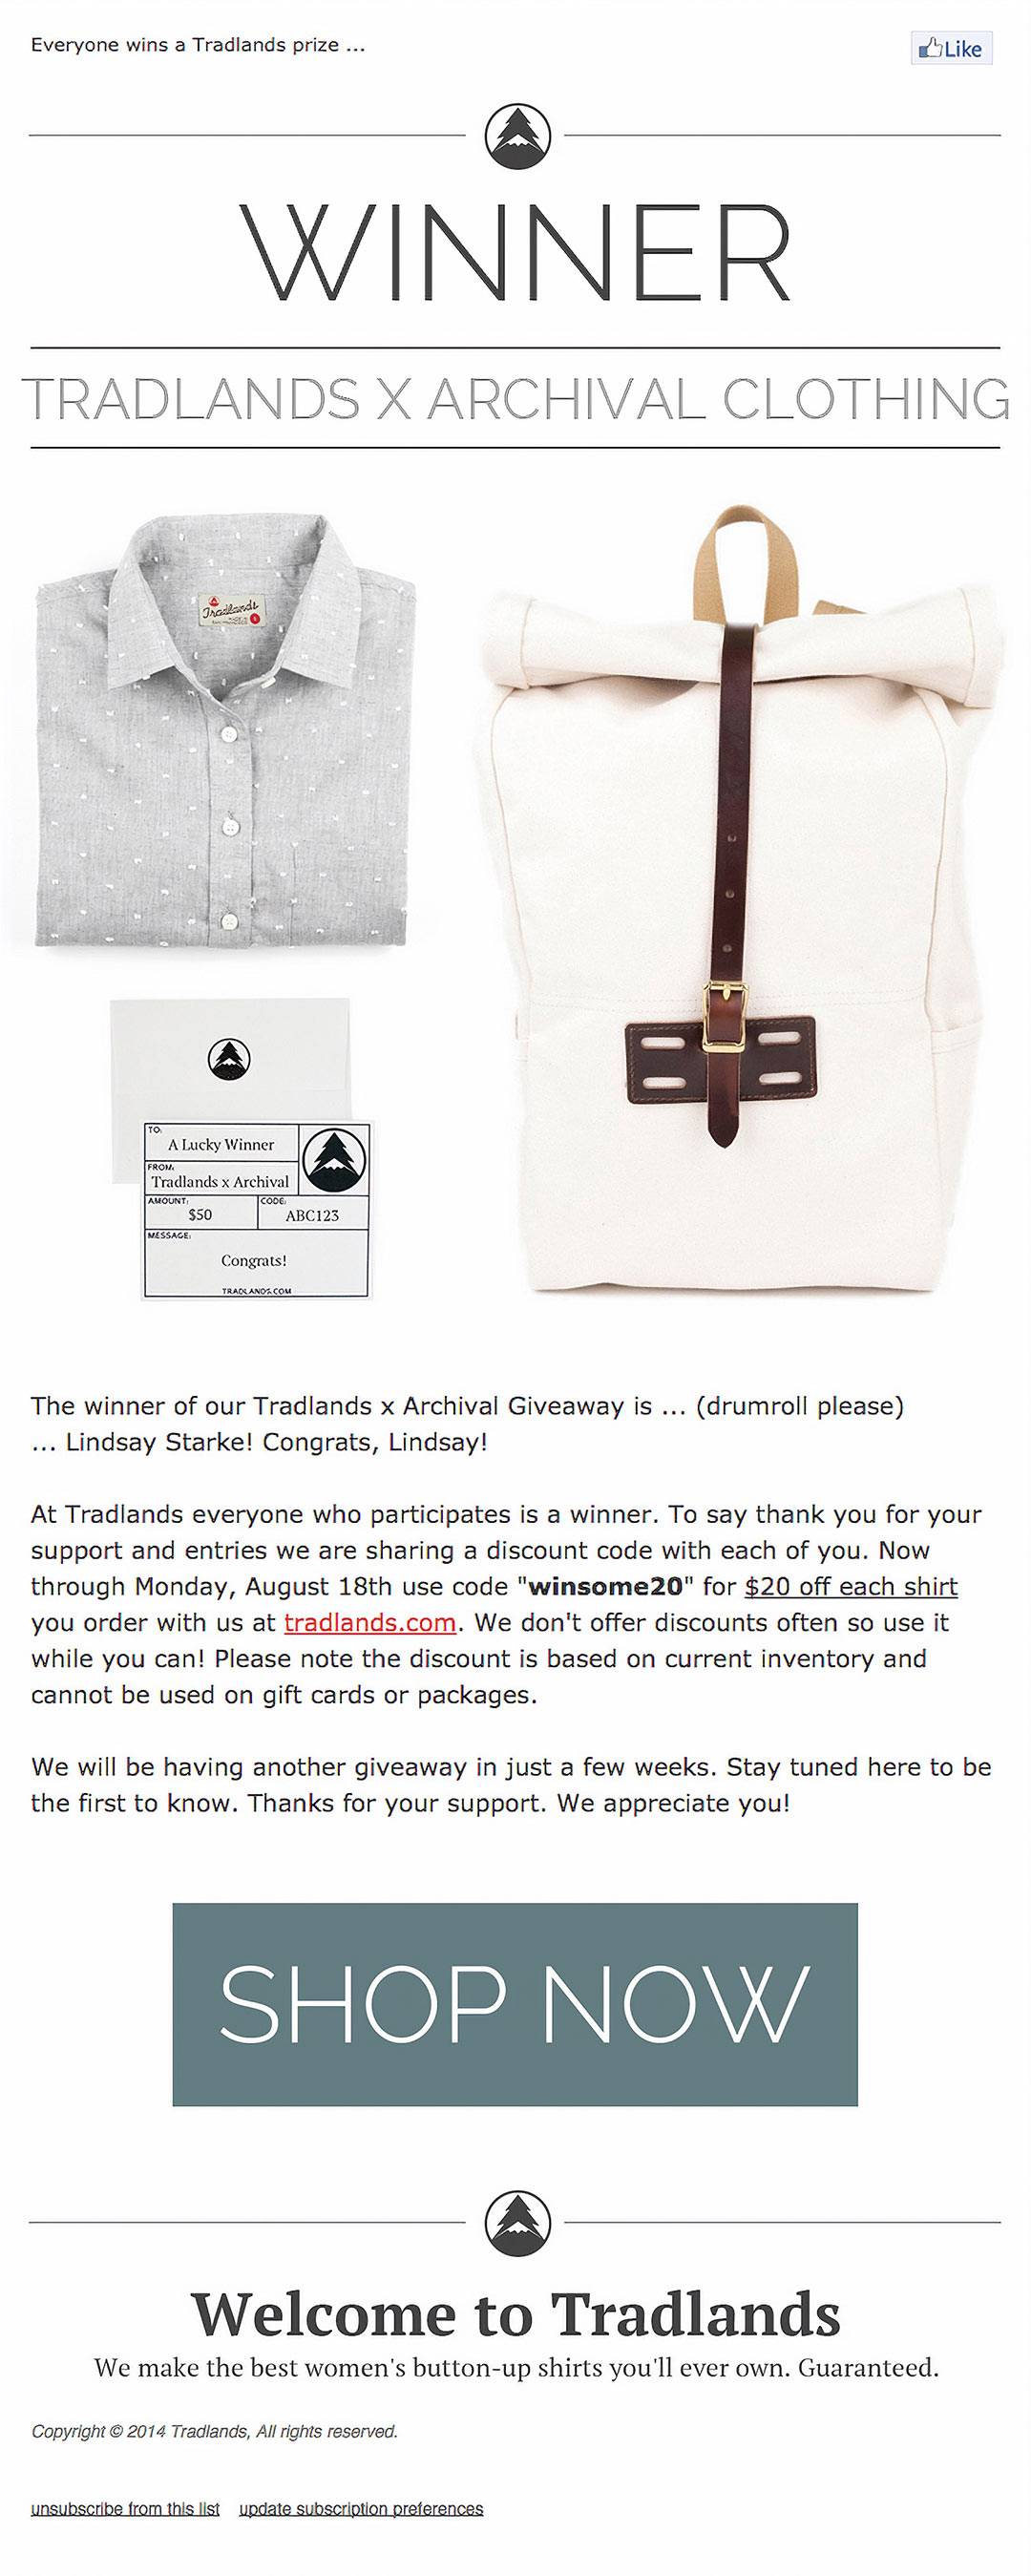 Promotional email blast for a giveaway campaign